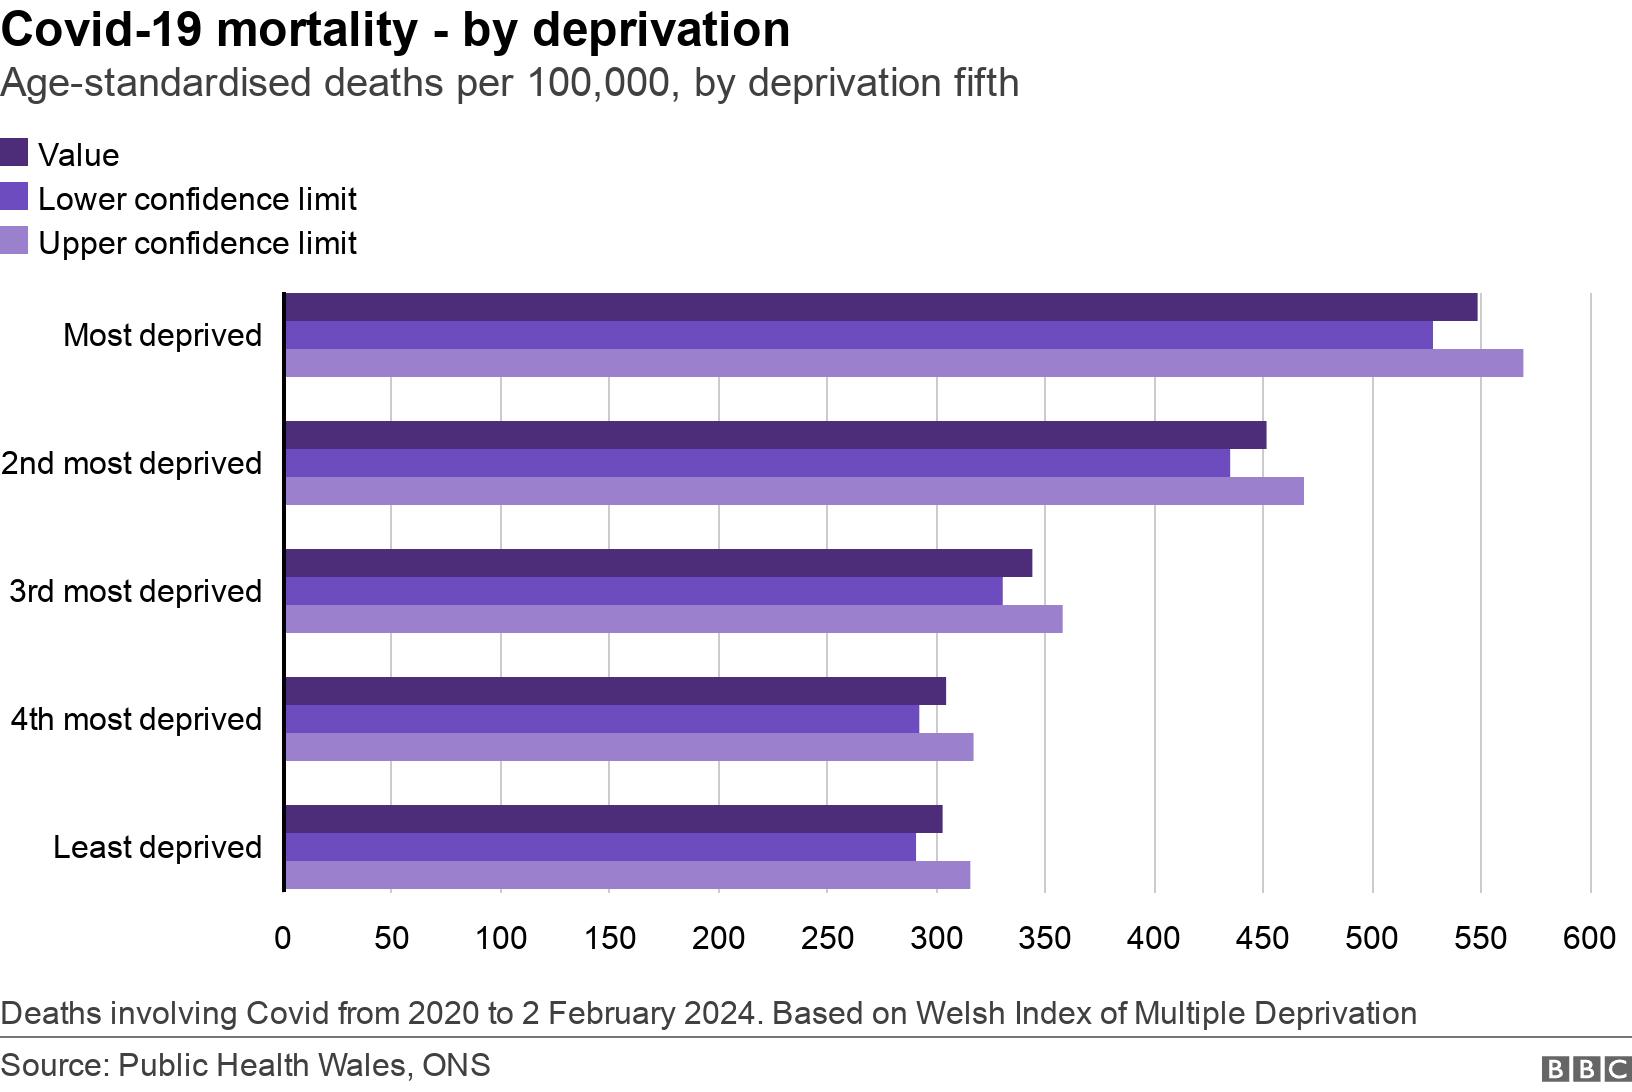 Covid-19 mortality - by deprivation. Age-standardised deaths  per 100,000, by deprivation fifth.  Deaths involving Covid from 2020 to 2 February 2024. Based on Welsh Index of Multiple Deprivation.